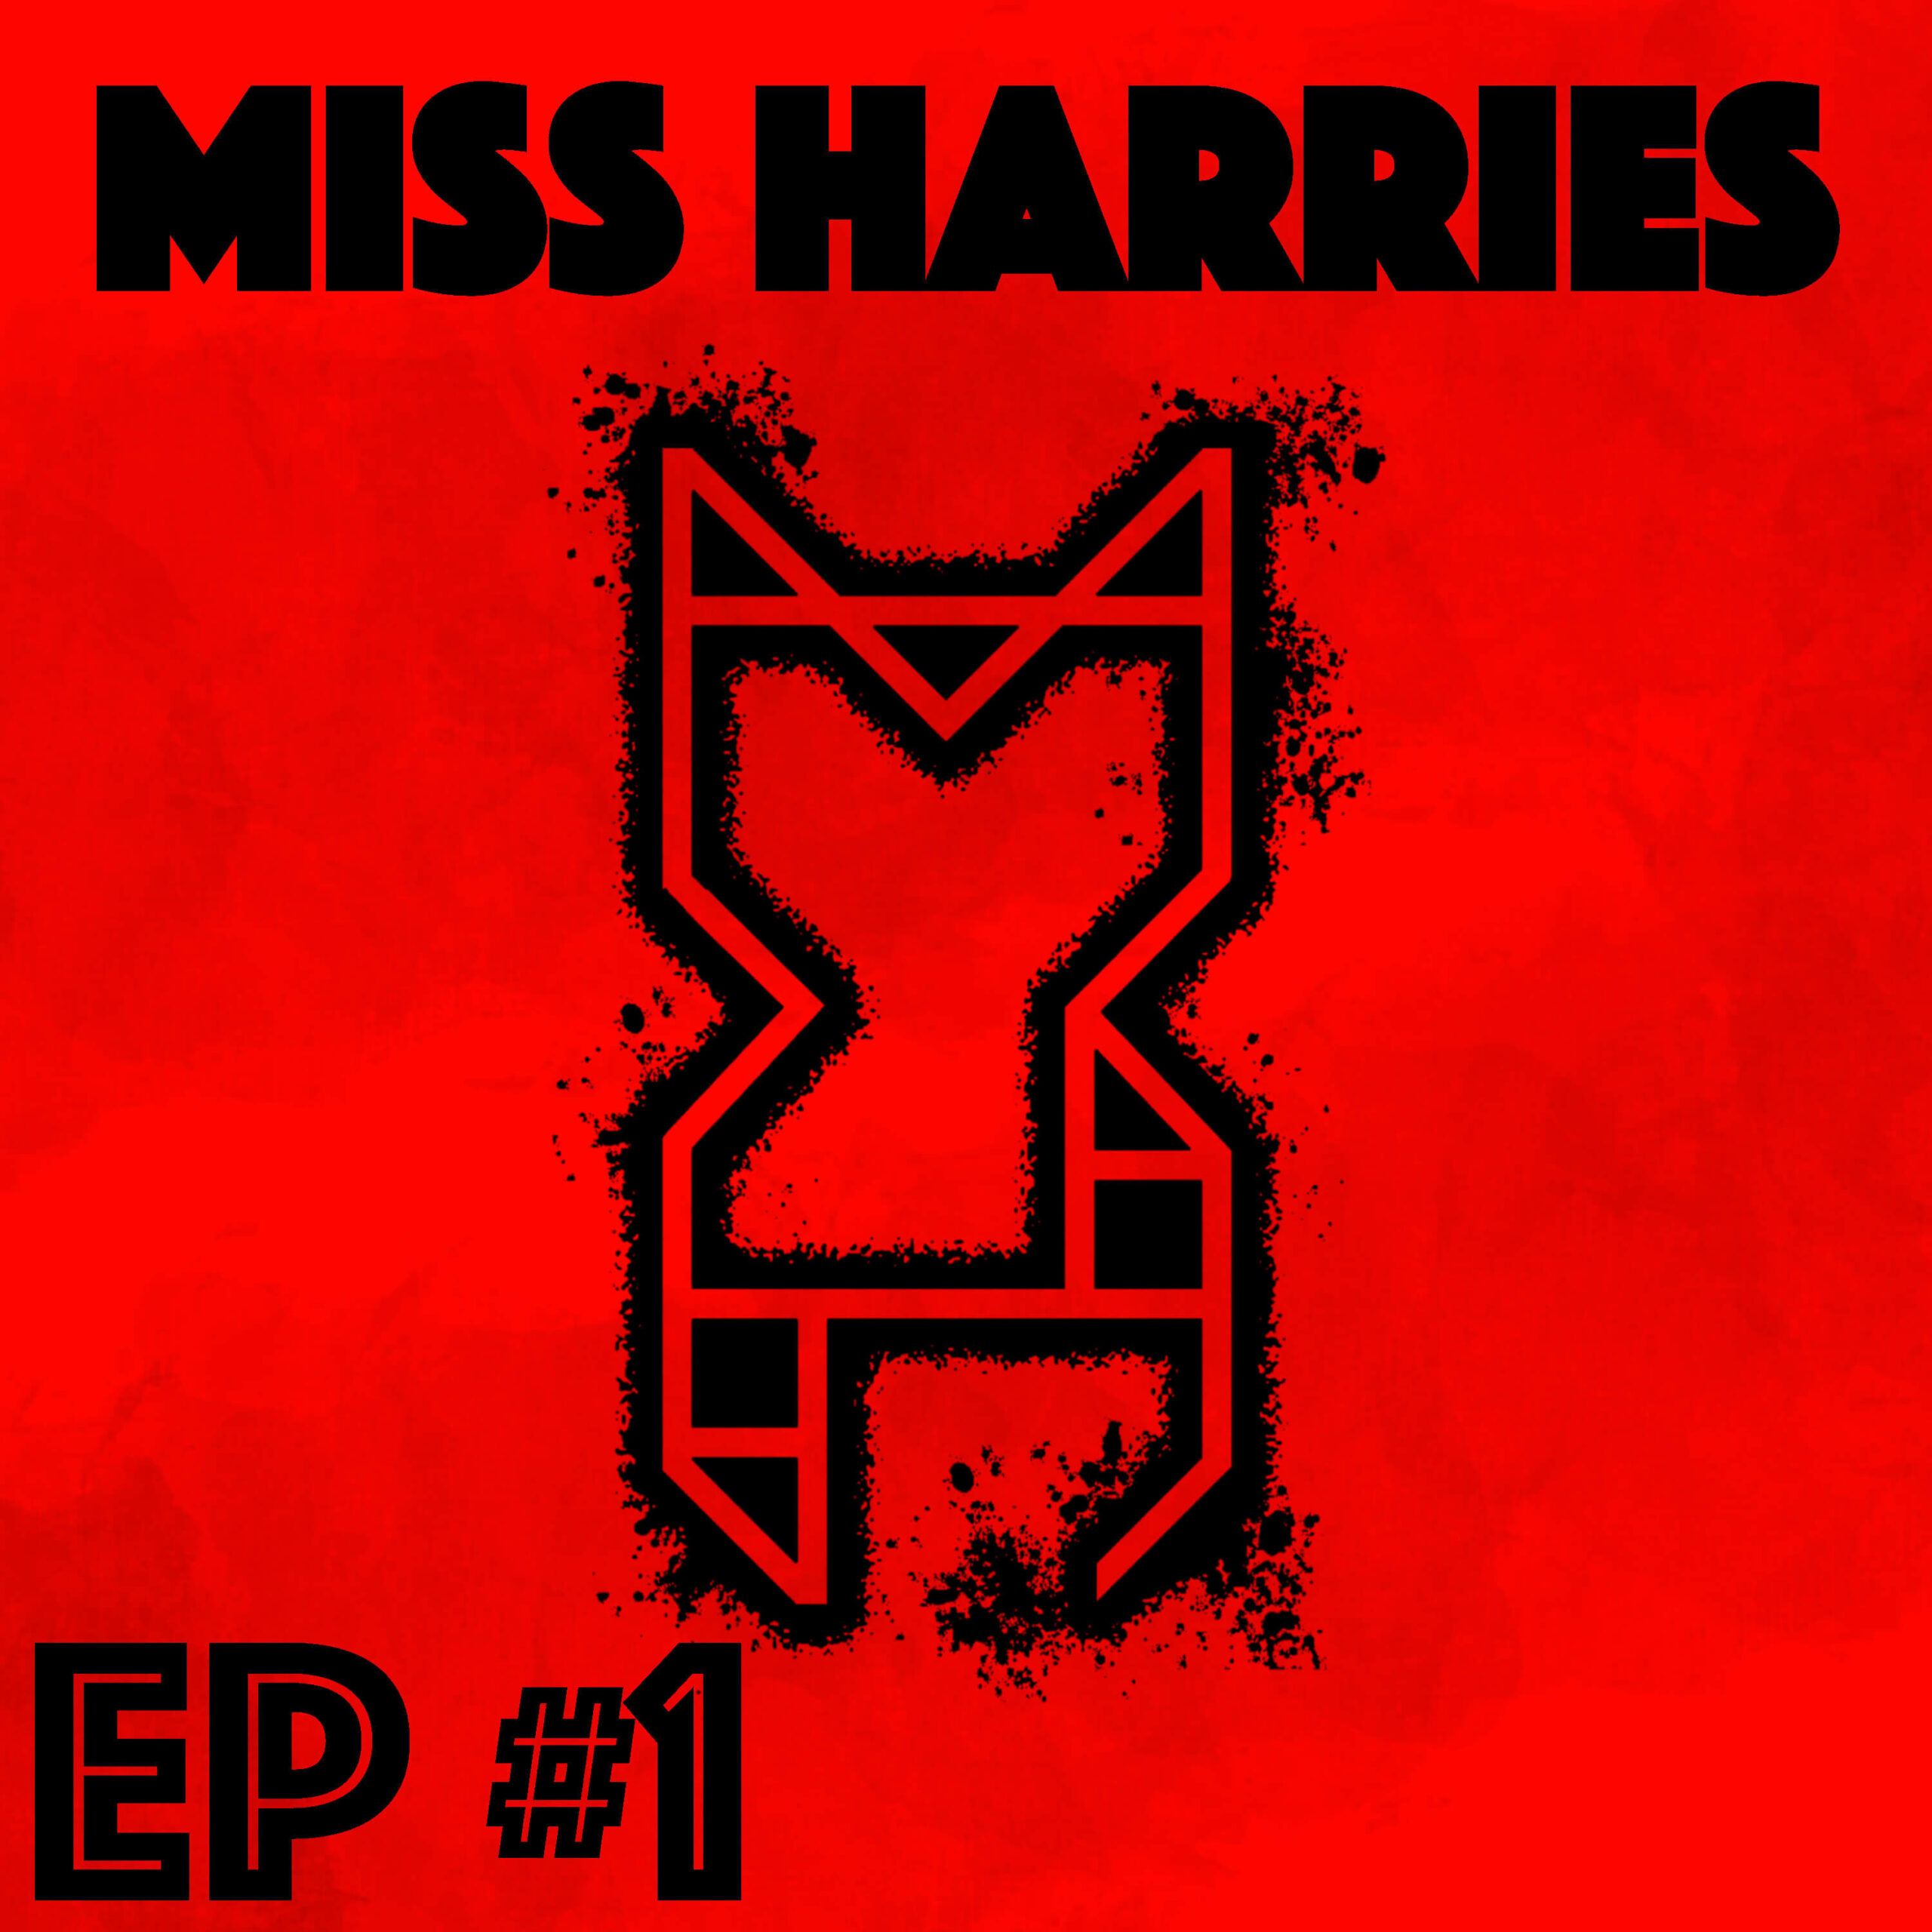 miss harries ep #1 photo cover